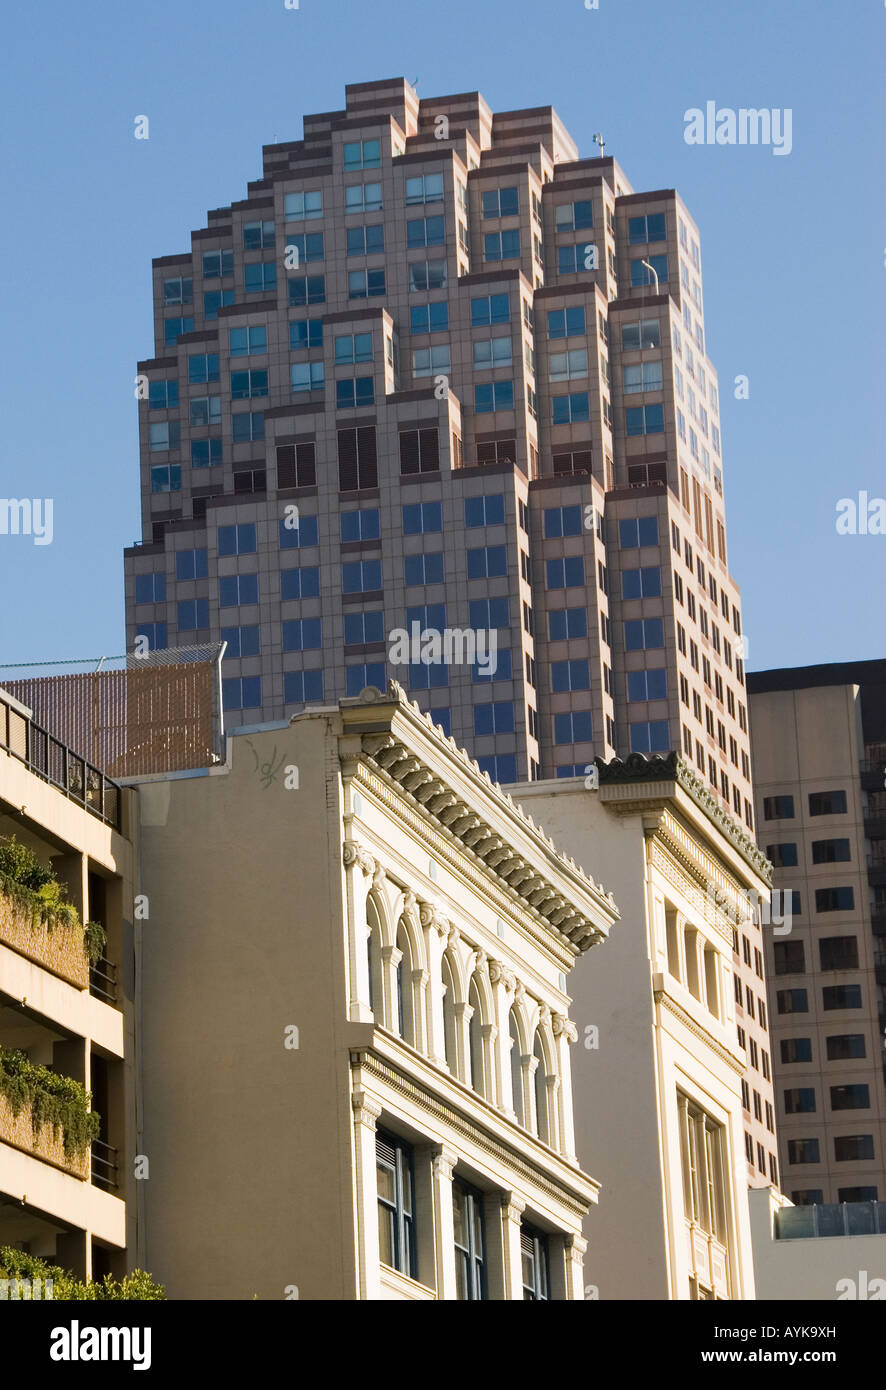 A range of different styles of architecture in San Francisco Stock Photo